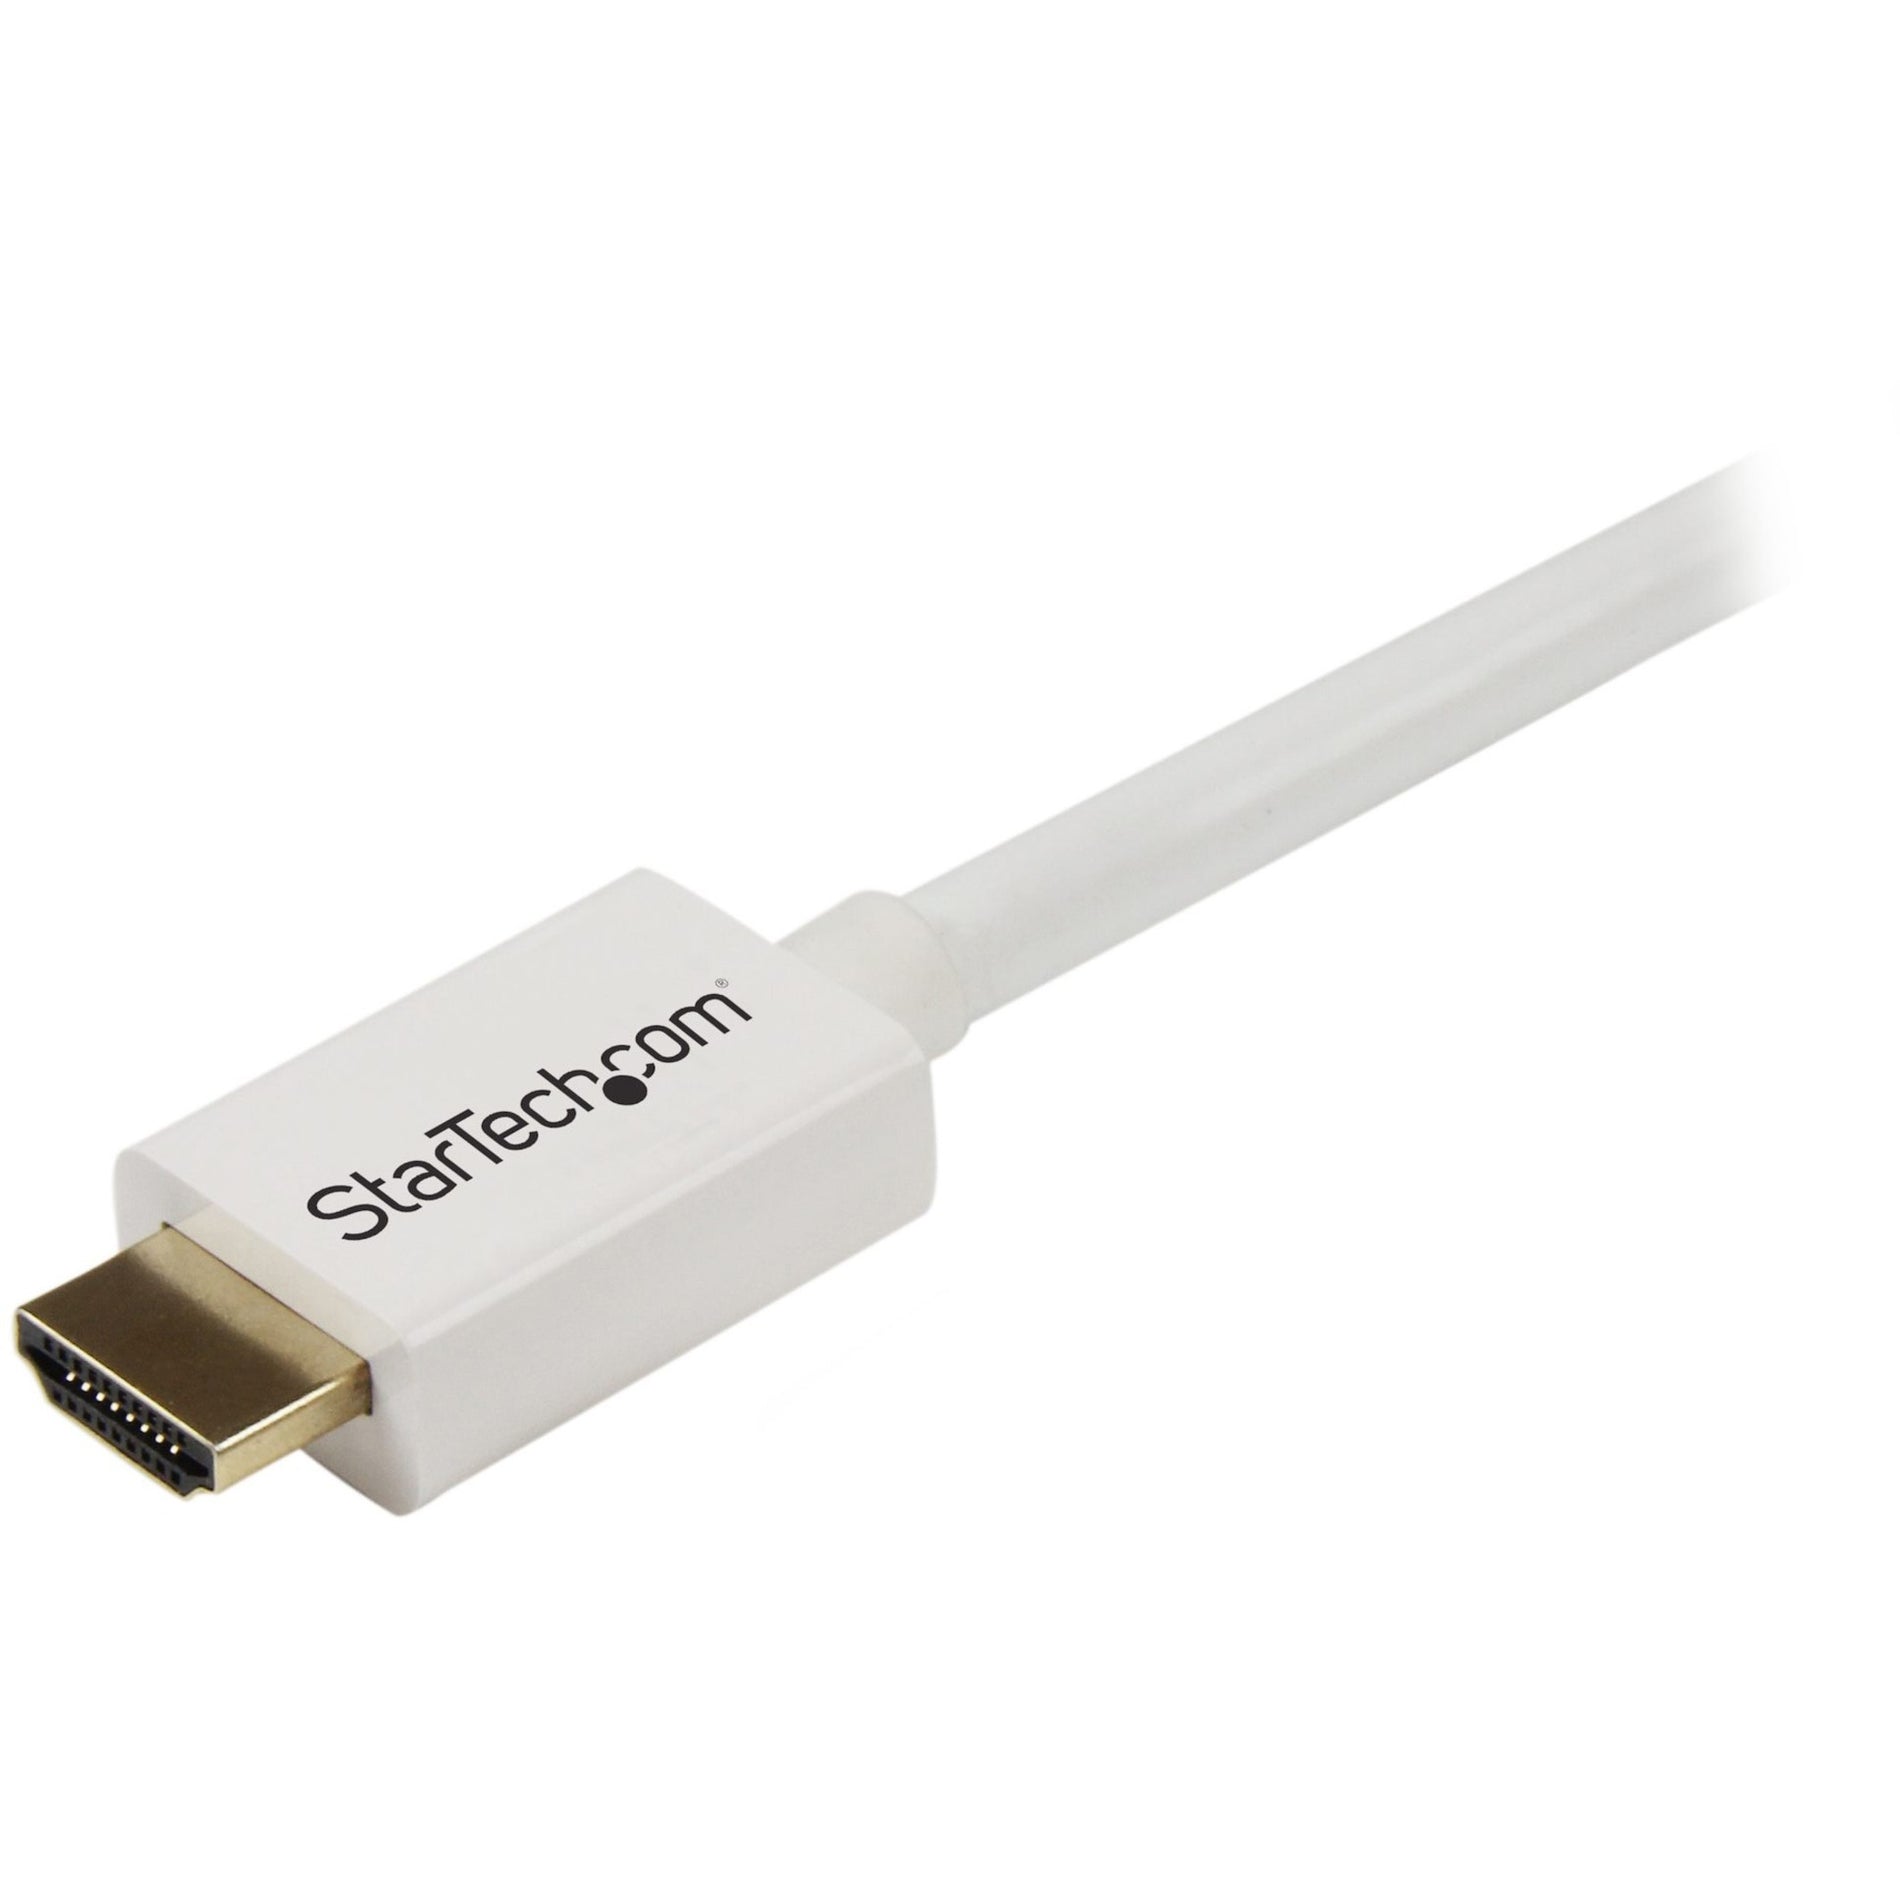 StarTech.com HD3MM2MW 2m (6 ft) White CL3 In-wall High Speed HDMI Cable - HDMI to HDMI - M/M, Corrosion-free, Gold Plated Connectors